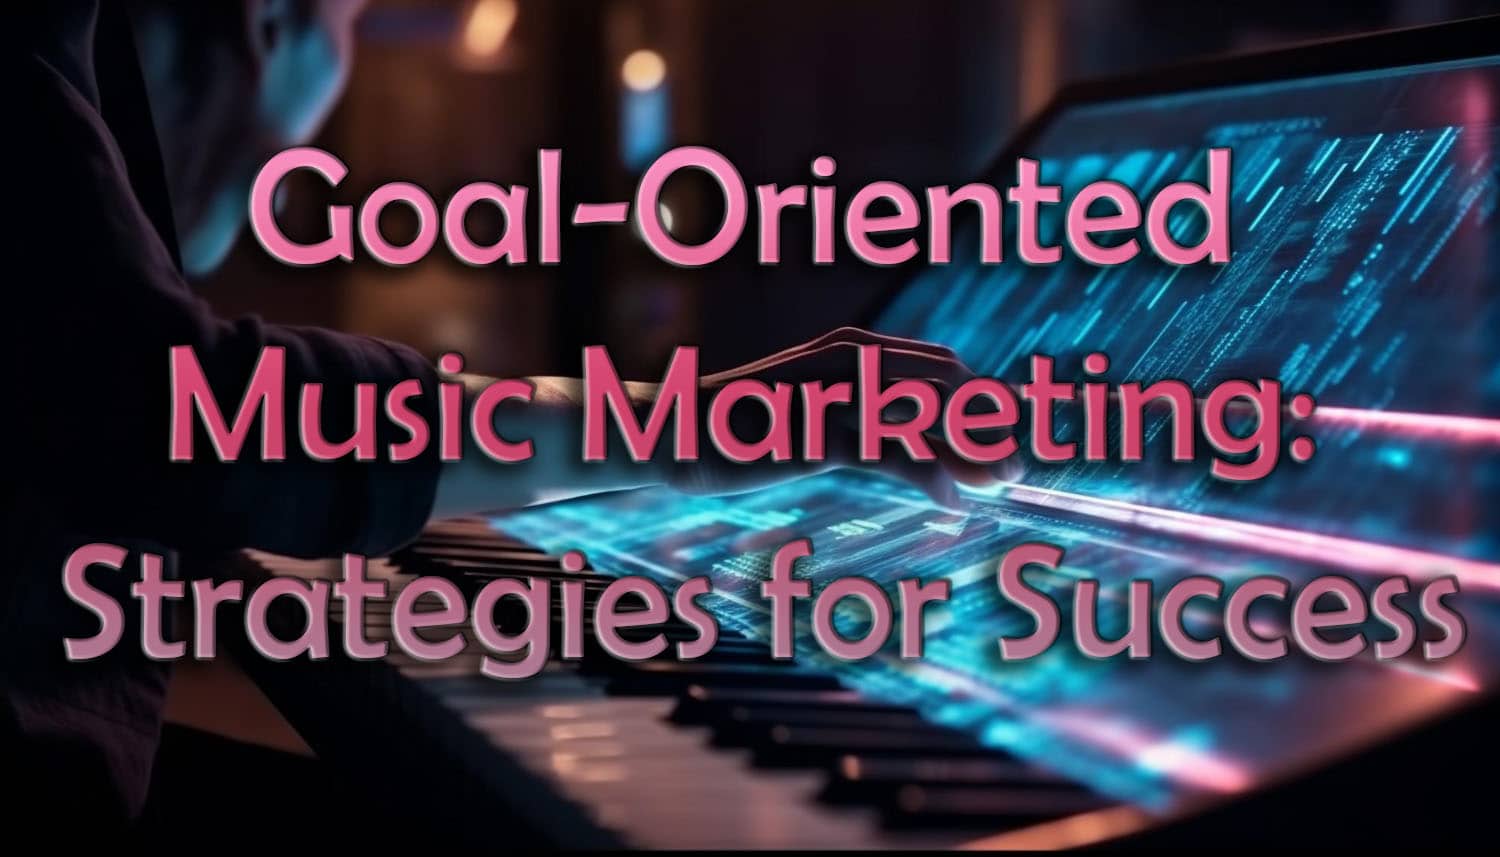 Goal-Oriented Music Marketing: Strategies for Success